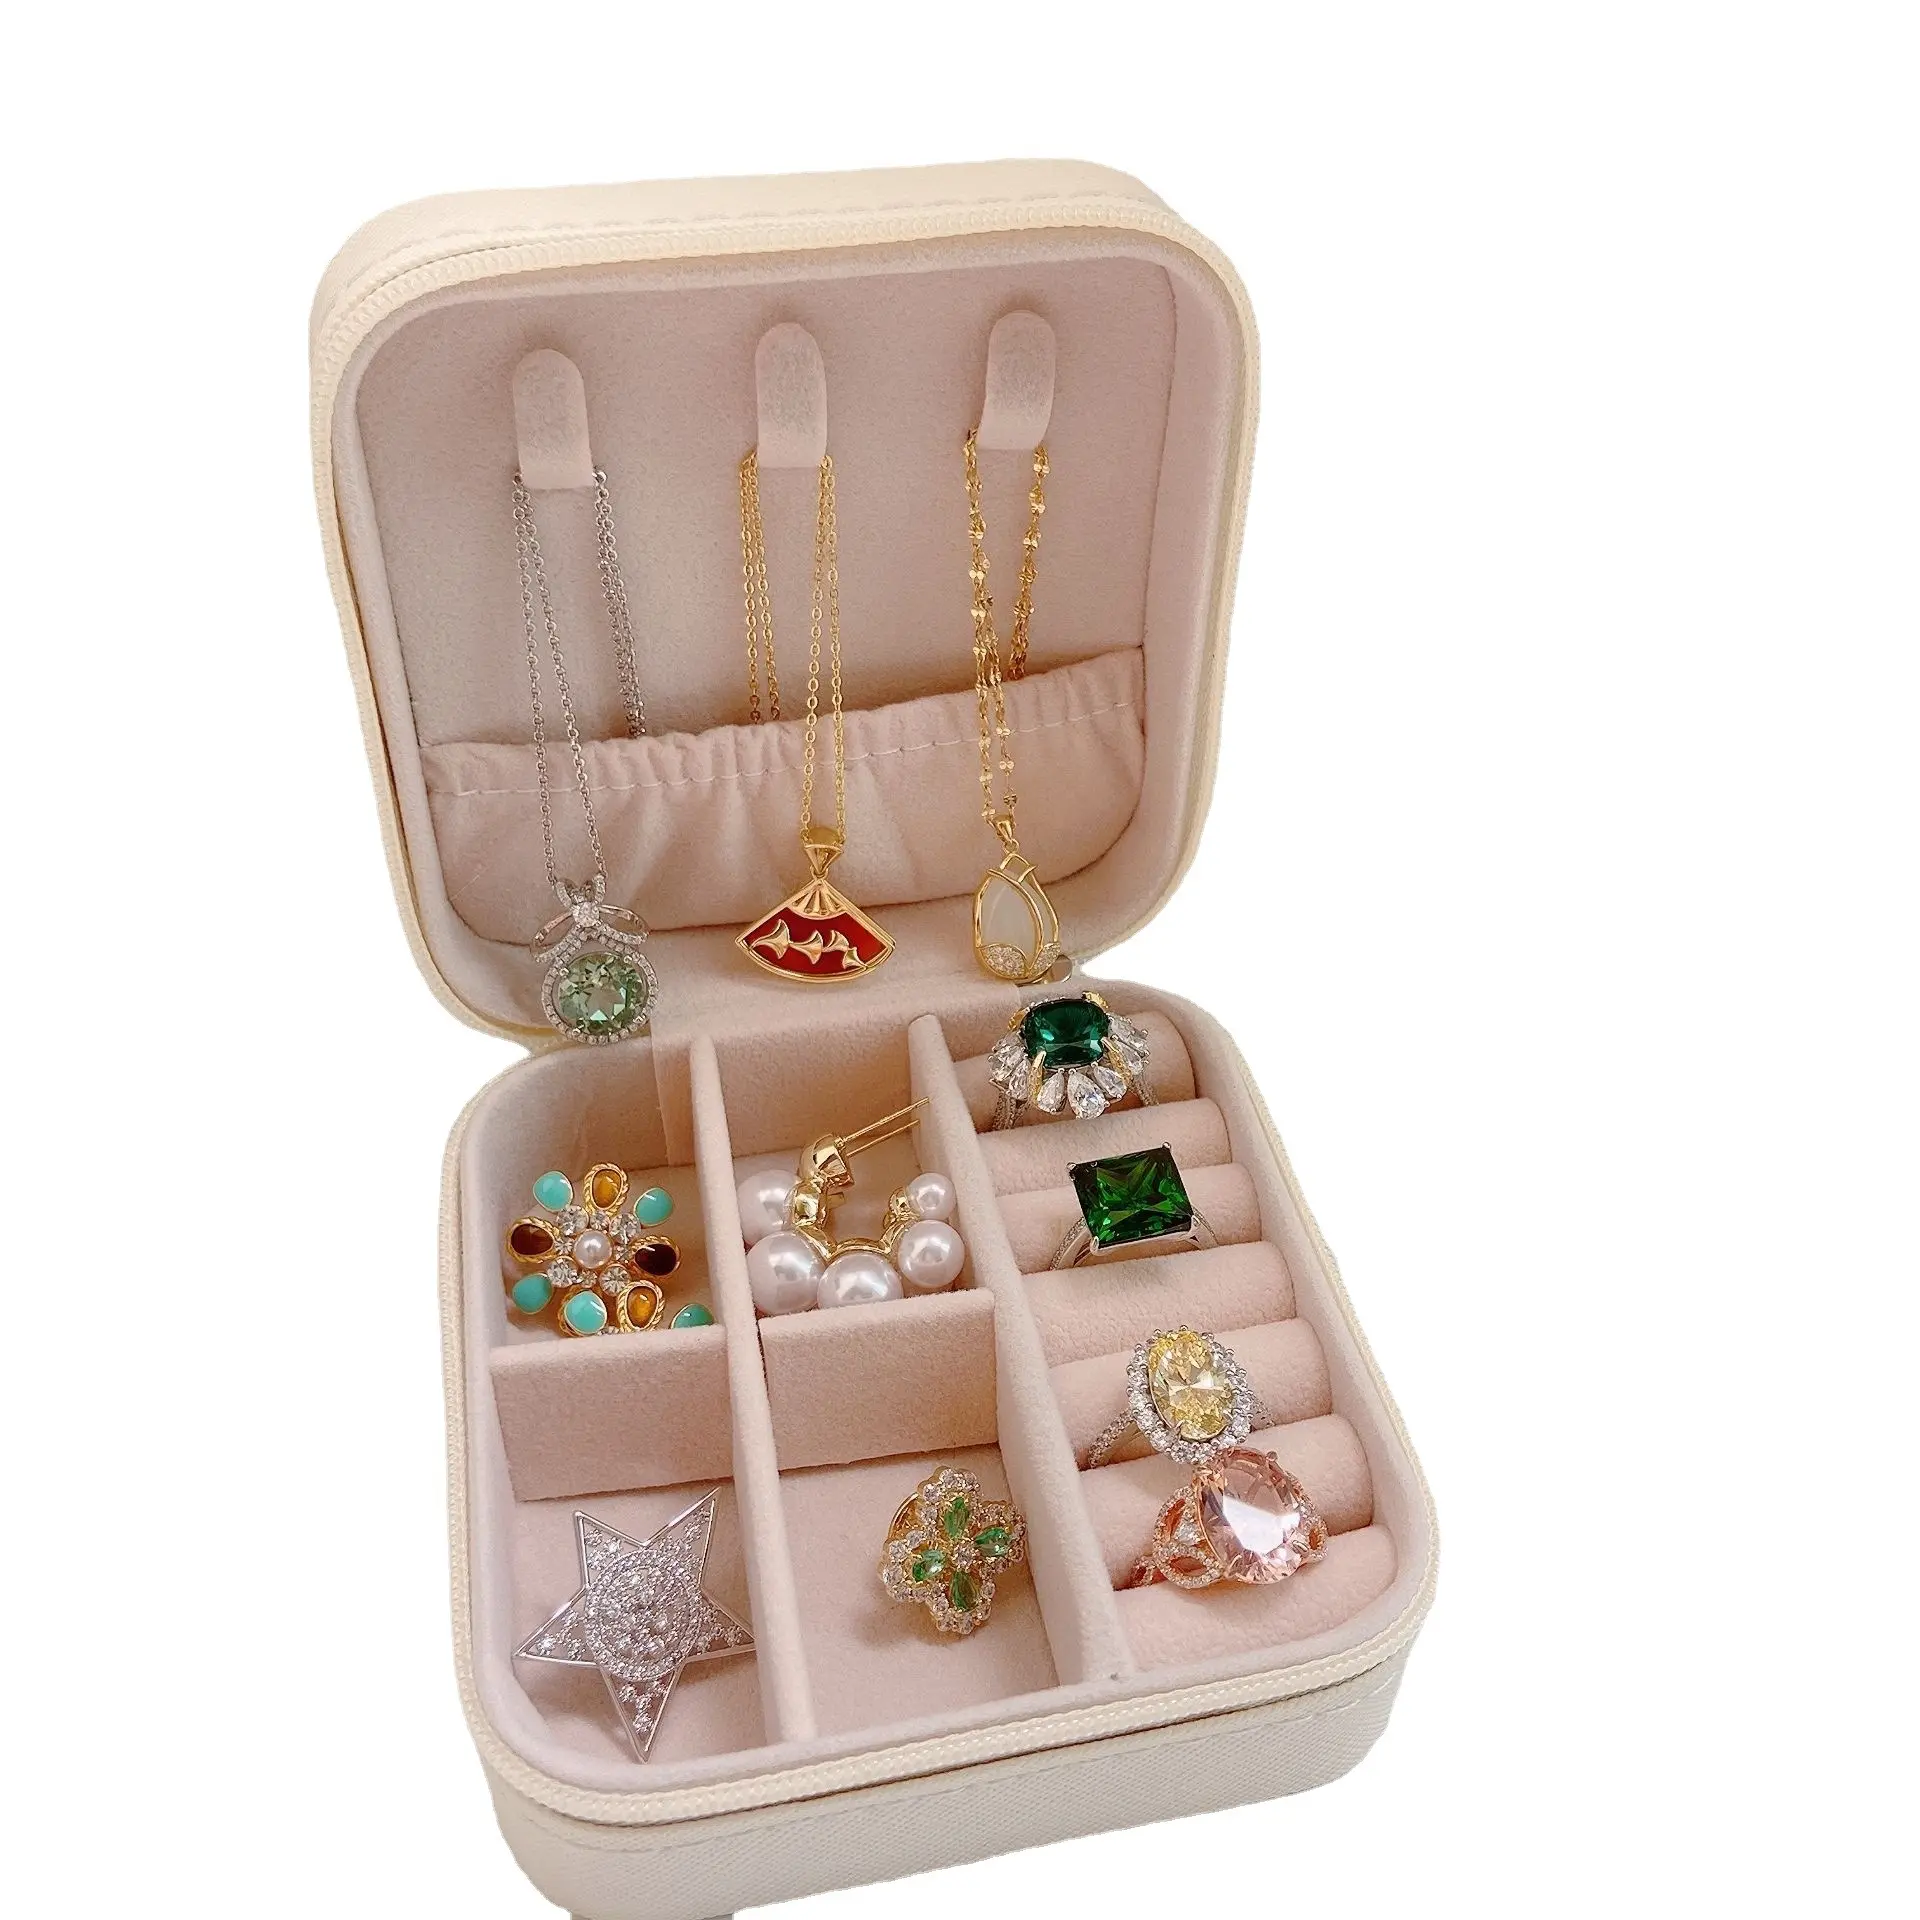 PU Leather Small Jewelry Box Organizer Storage Travel Portable Jewelry Case for Ring Pendant Earring Necklace Bracelet